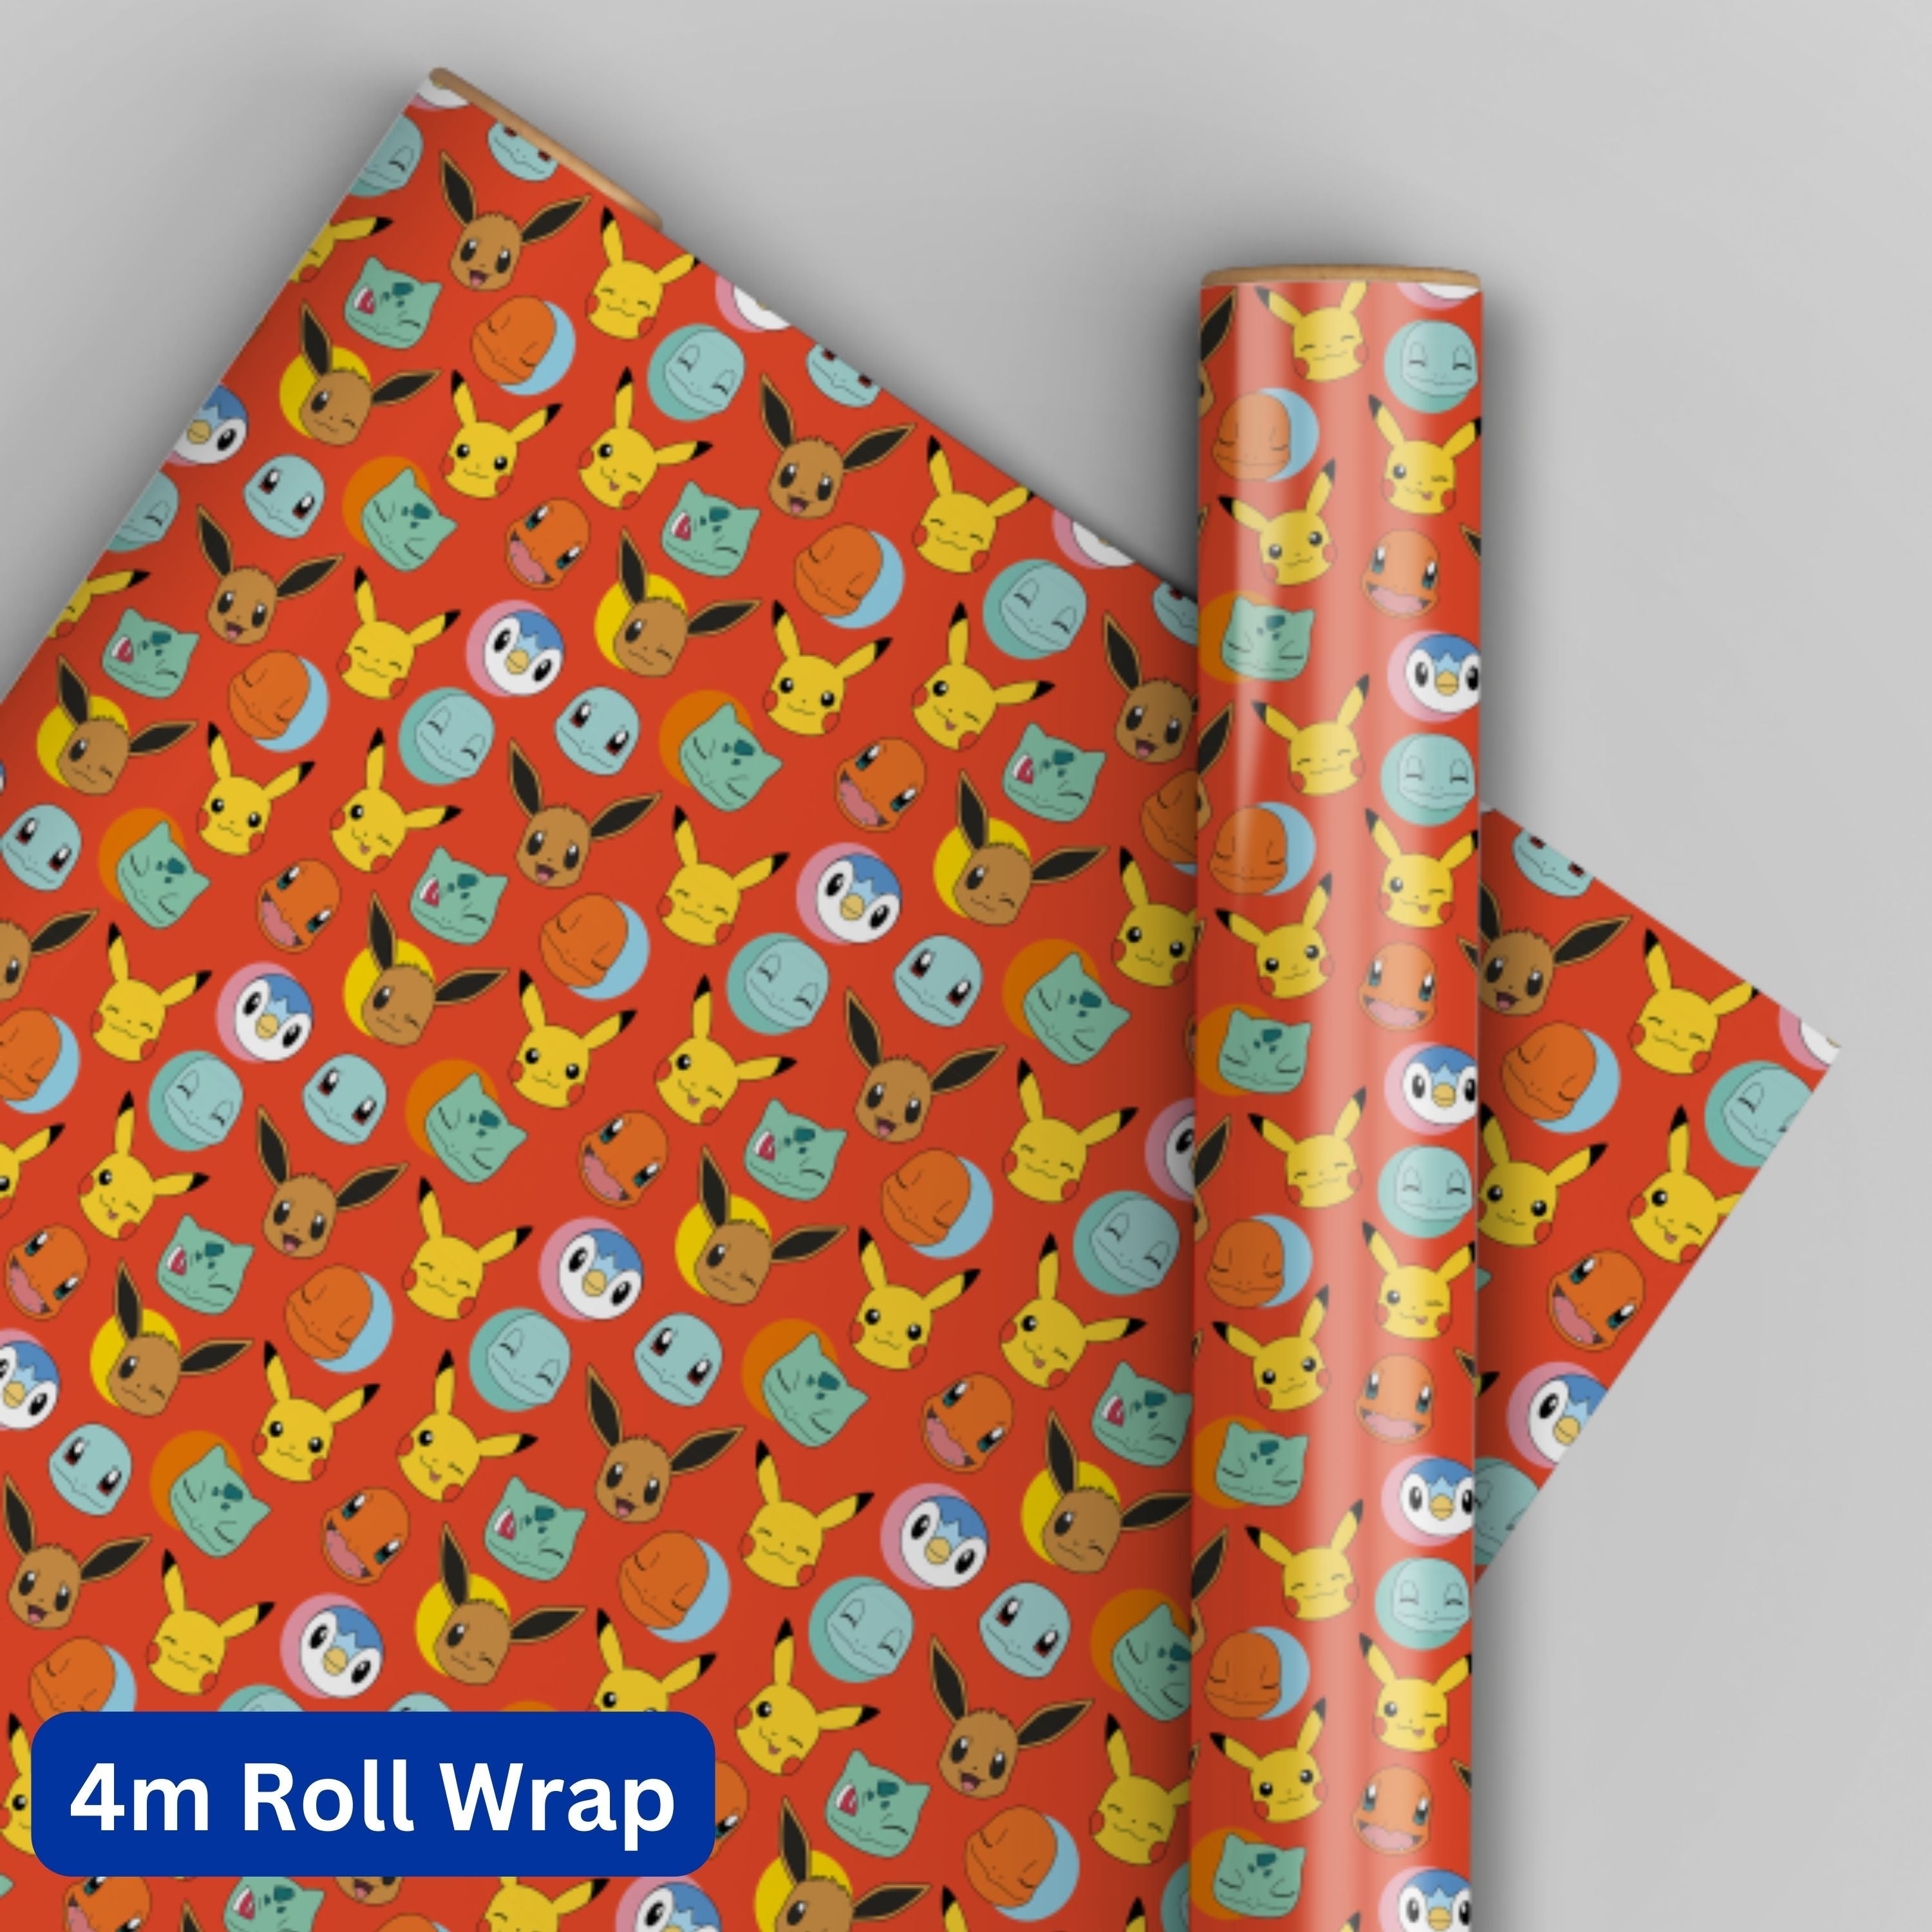 Christmas Star Wars Wrapping Paper 4m Each